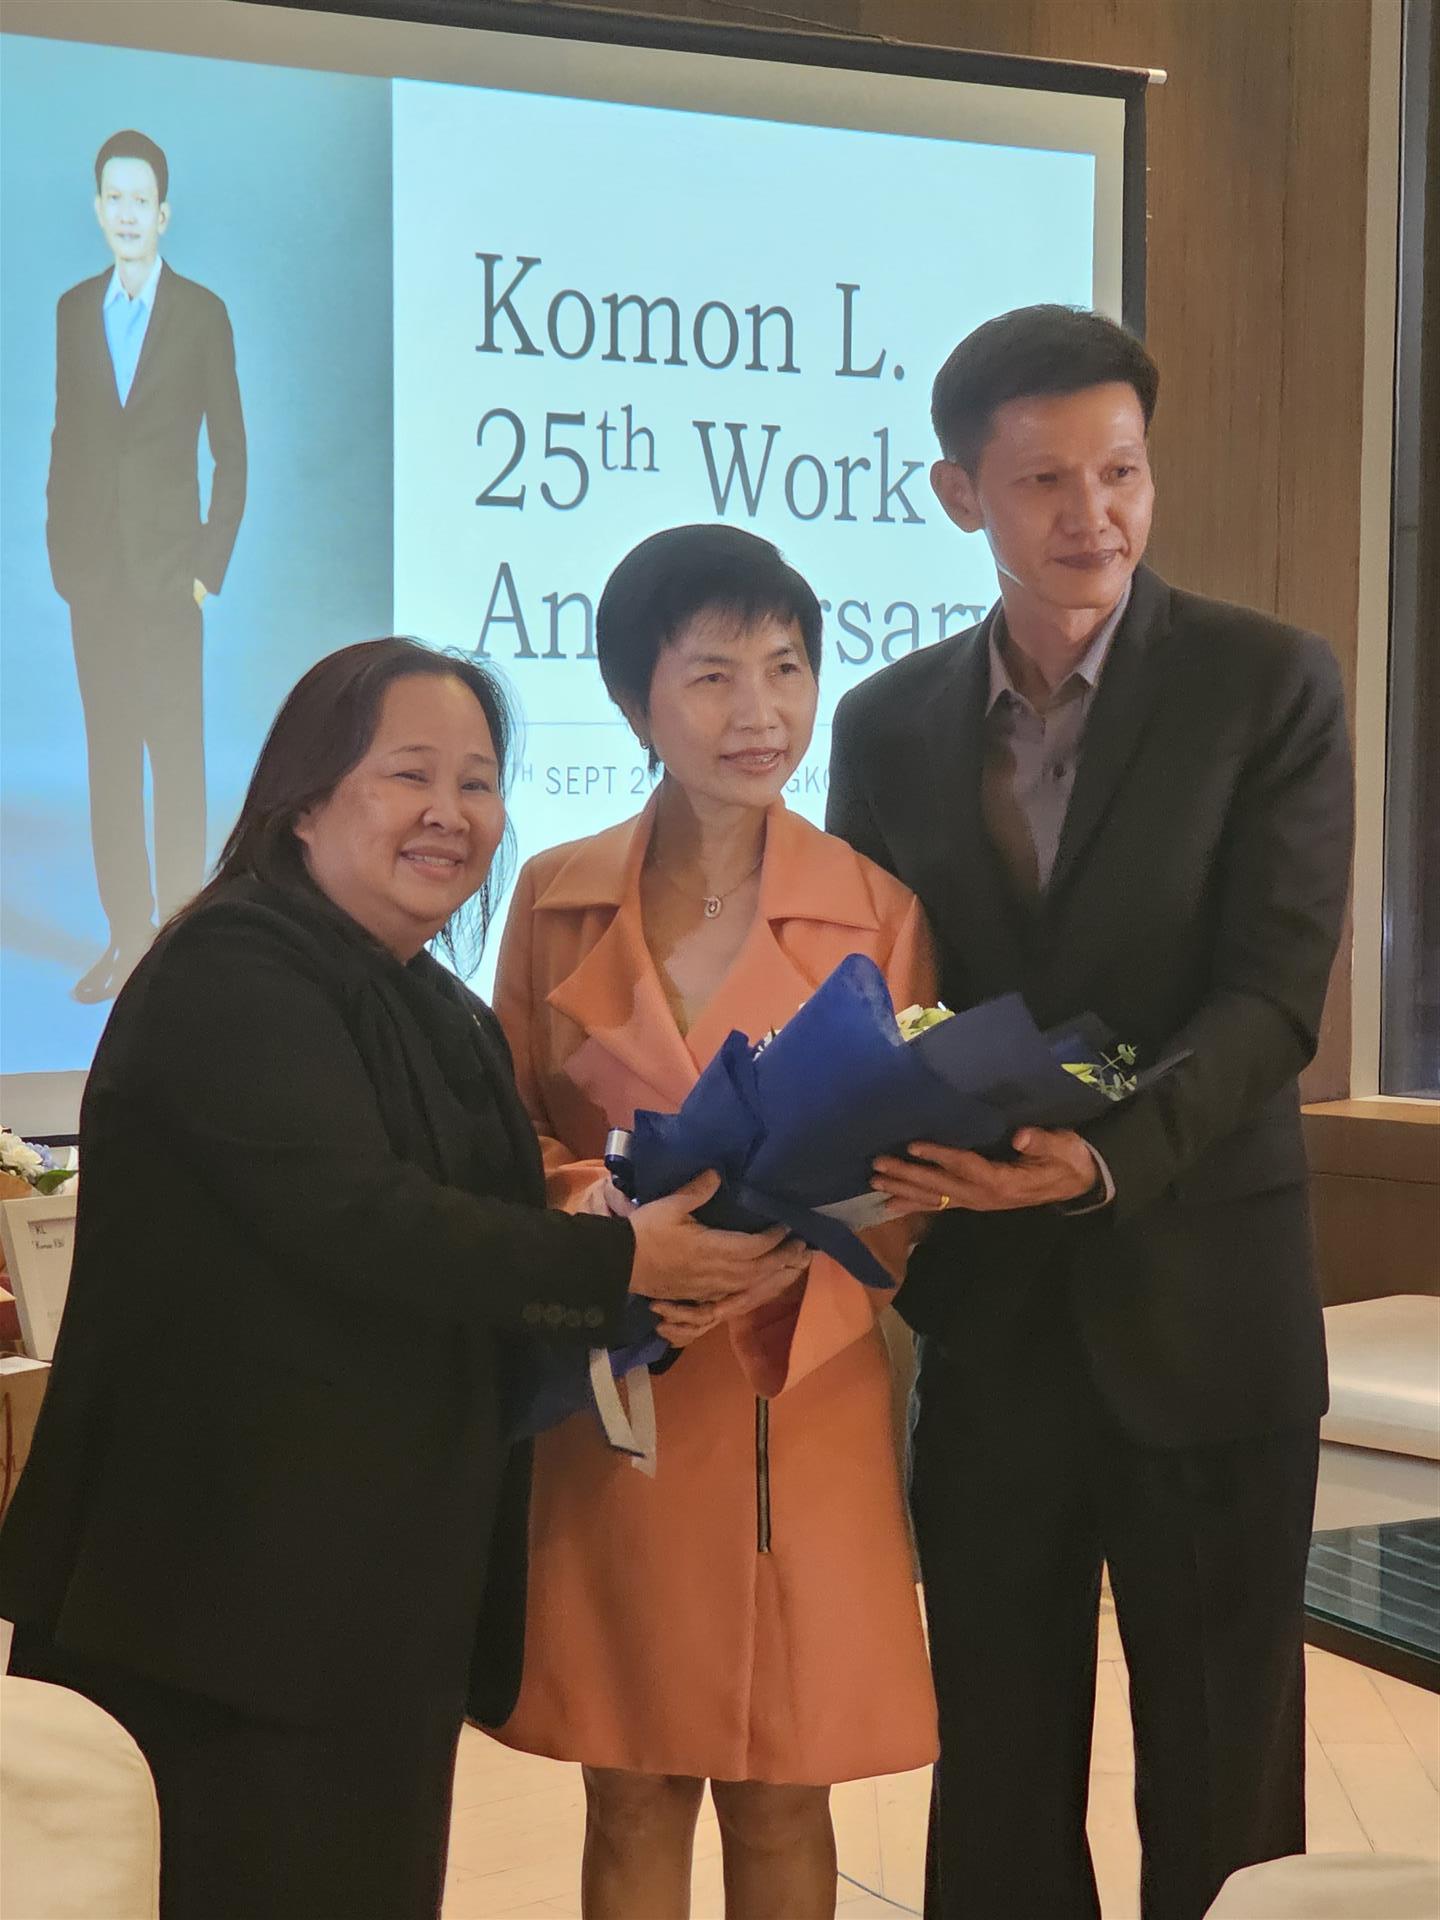 Ingredients CEO Lim Siew Tin presenting flowers to Komon and his wife